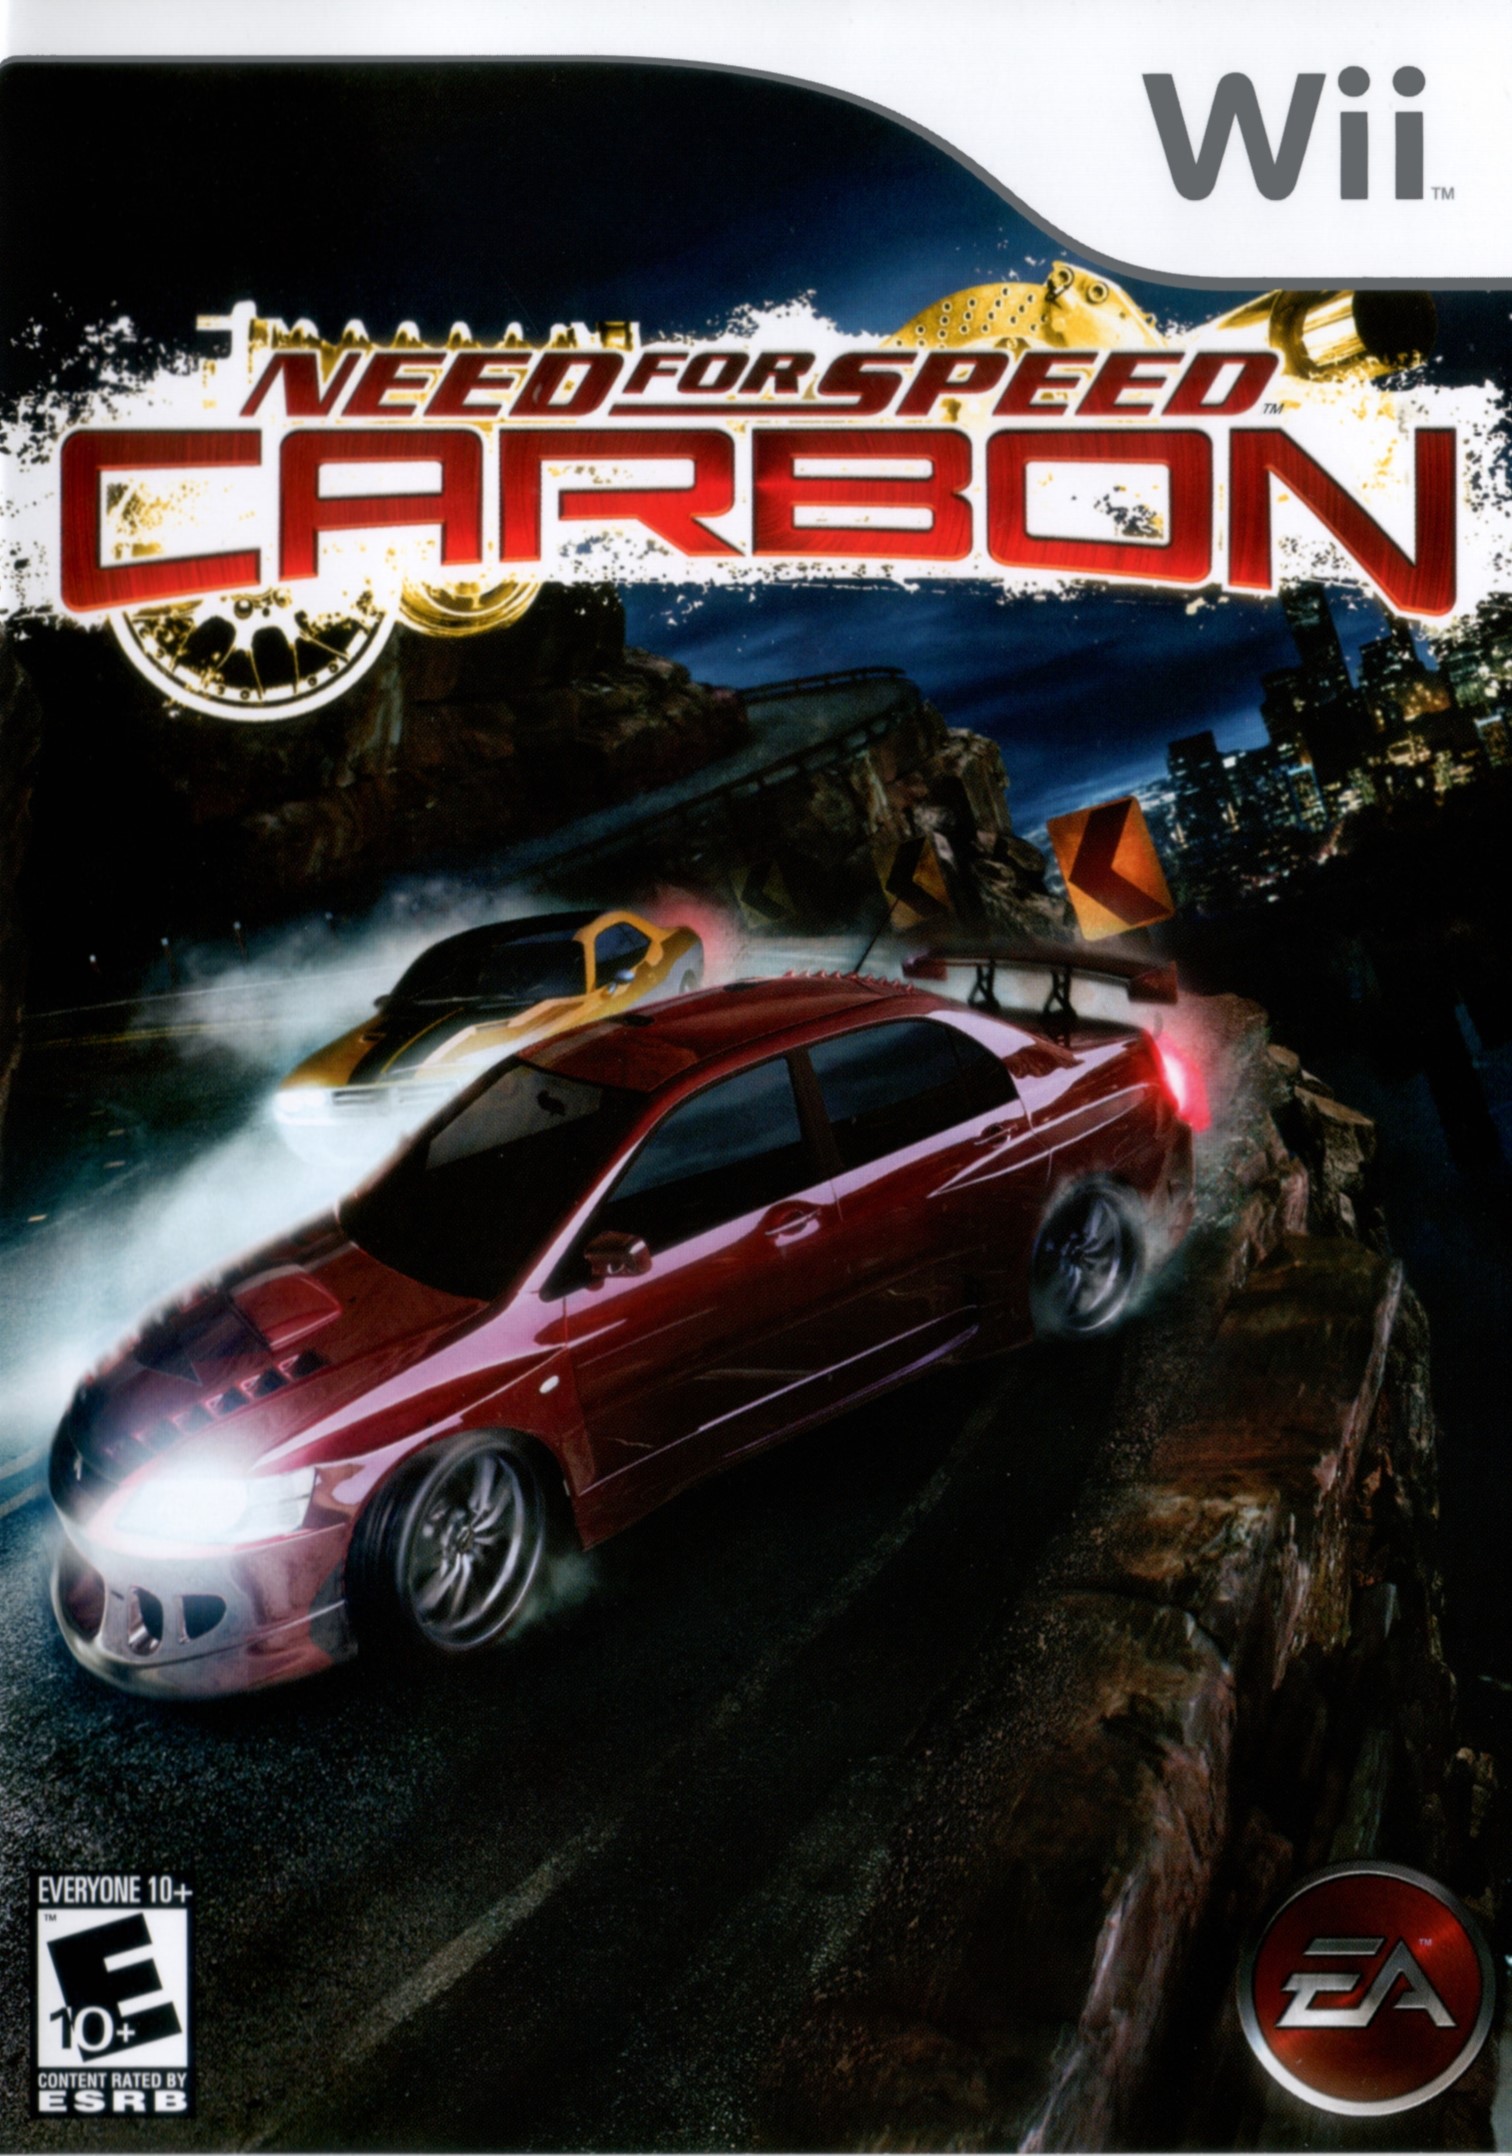 'Need for Speed: Carbon'